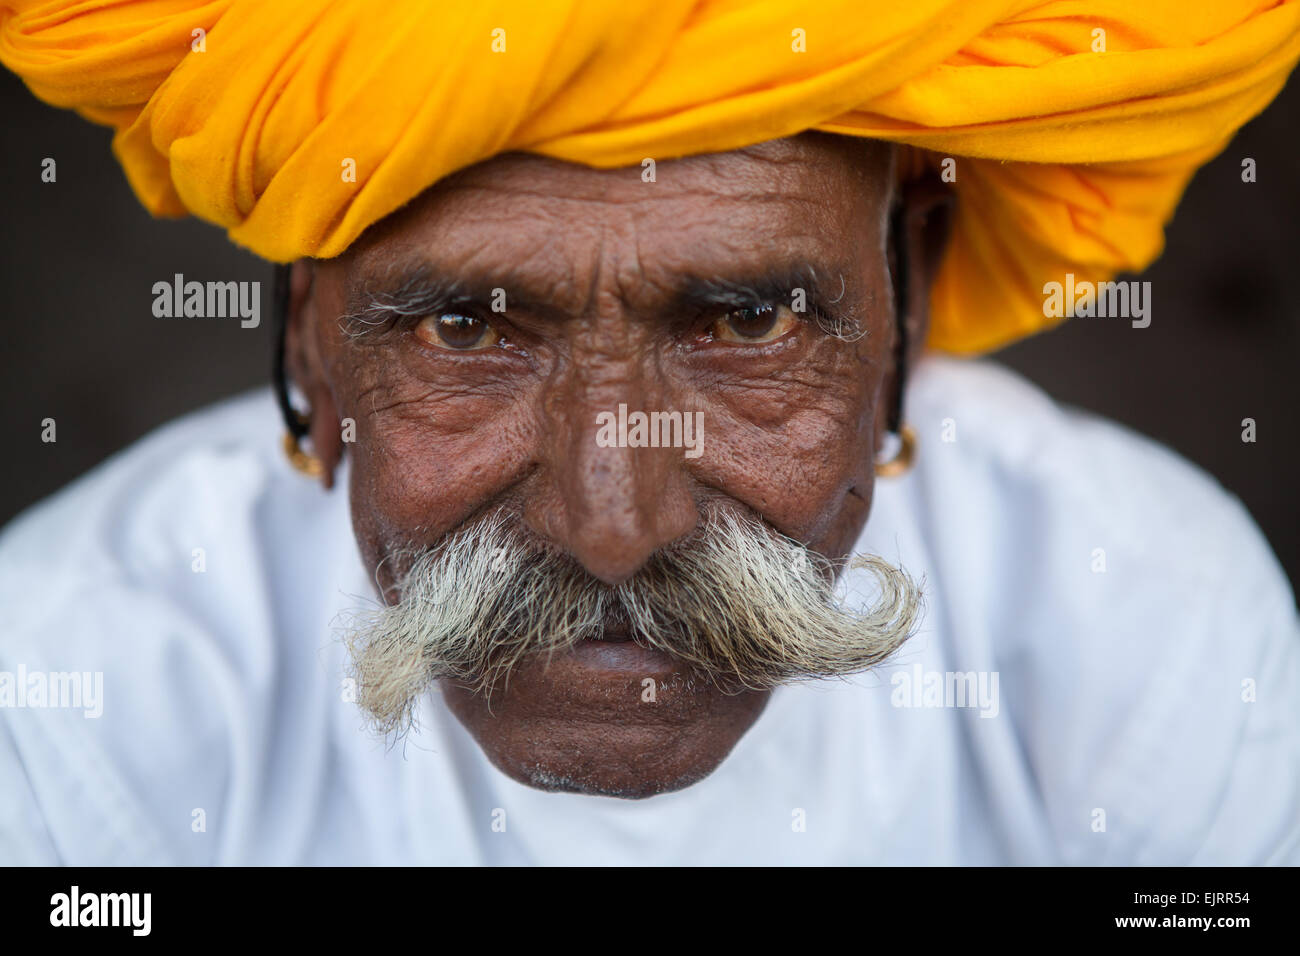 Portrait of a Rajasthani man with a moustache and turban Stock Photo